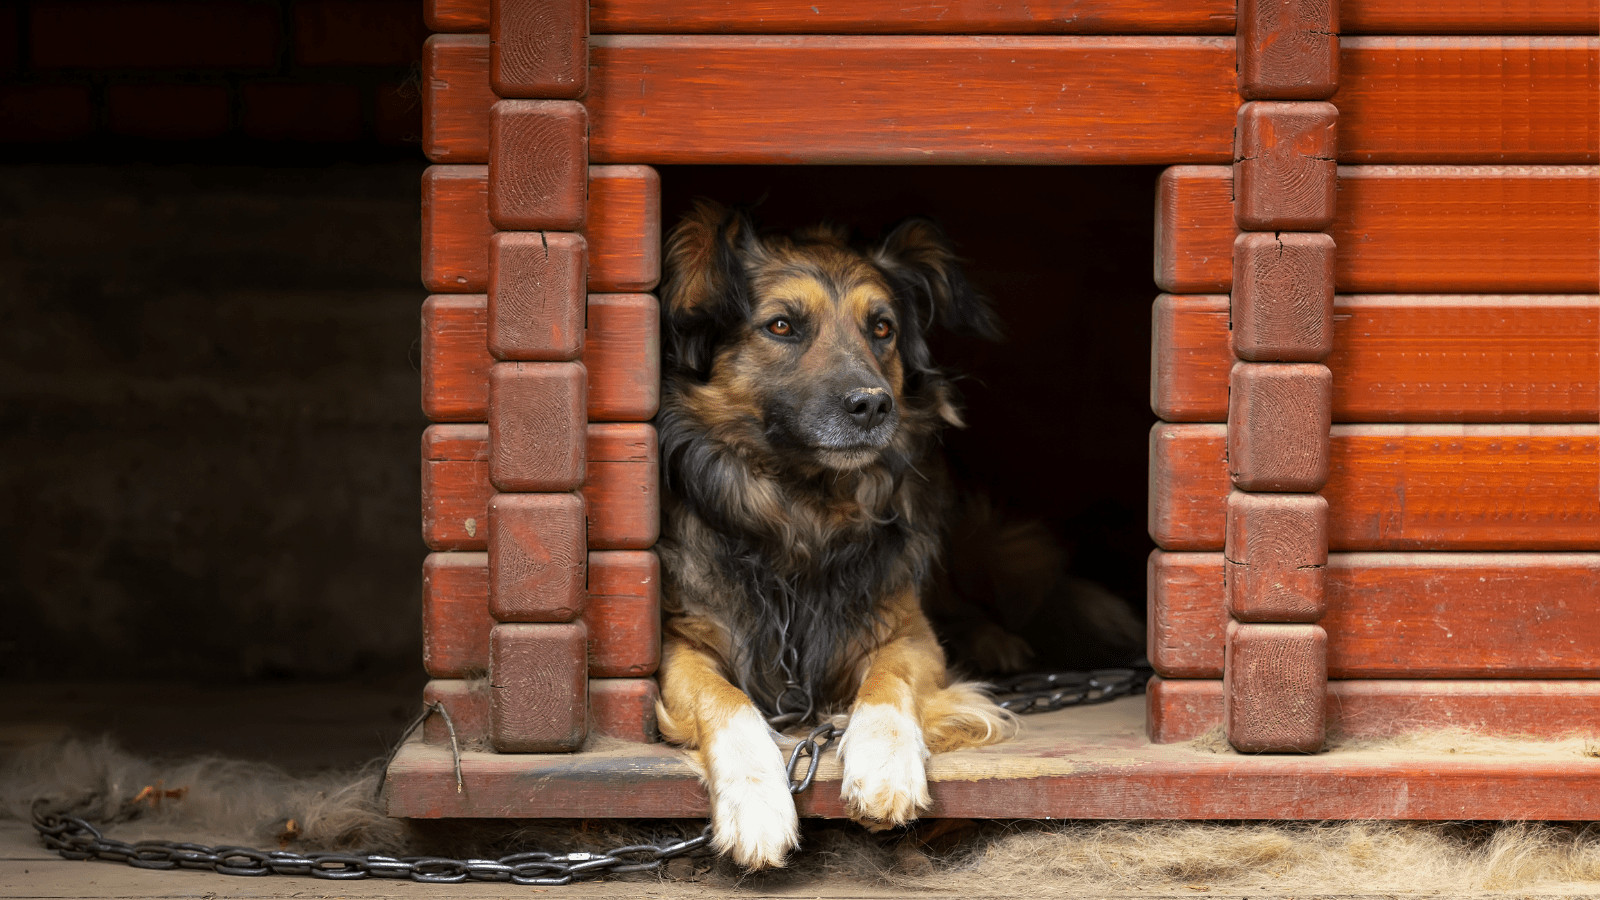 How to choose a dog kennel for an aggressive dog